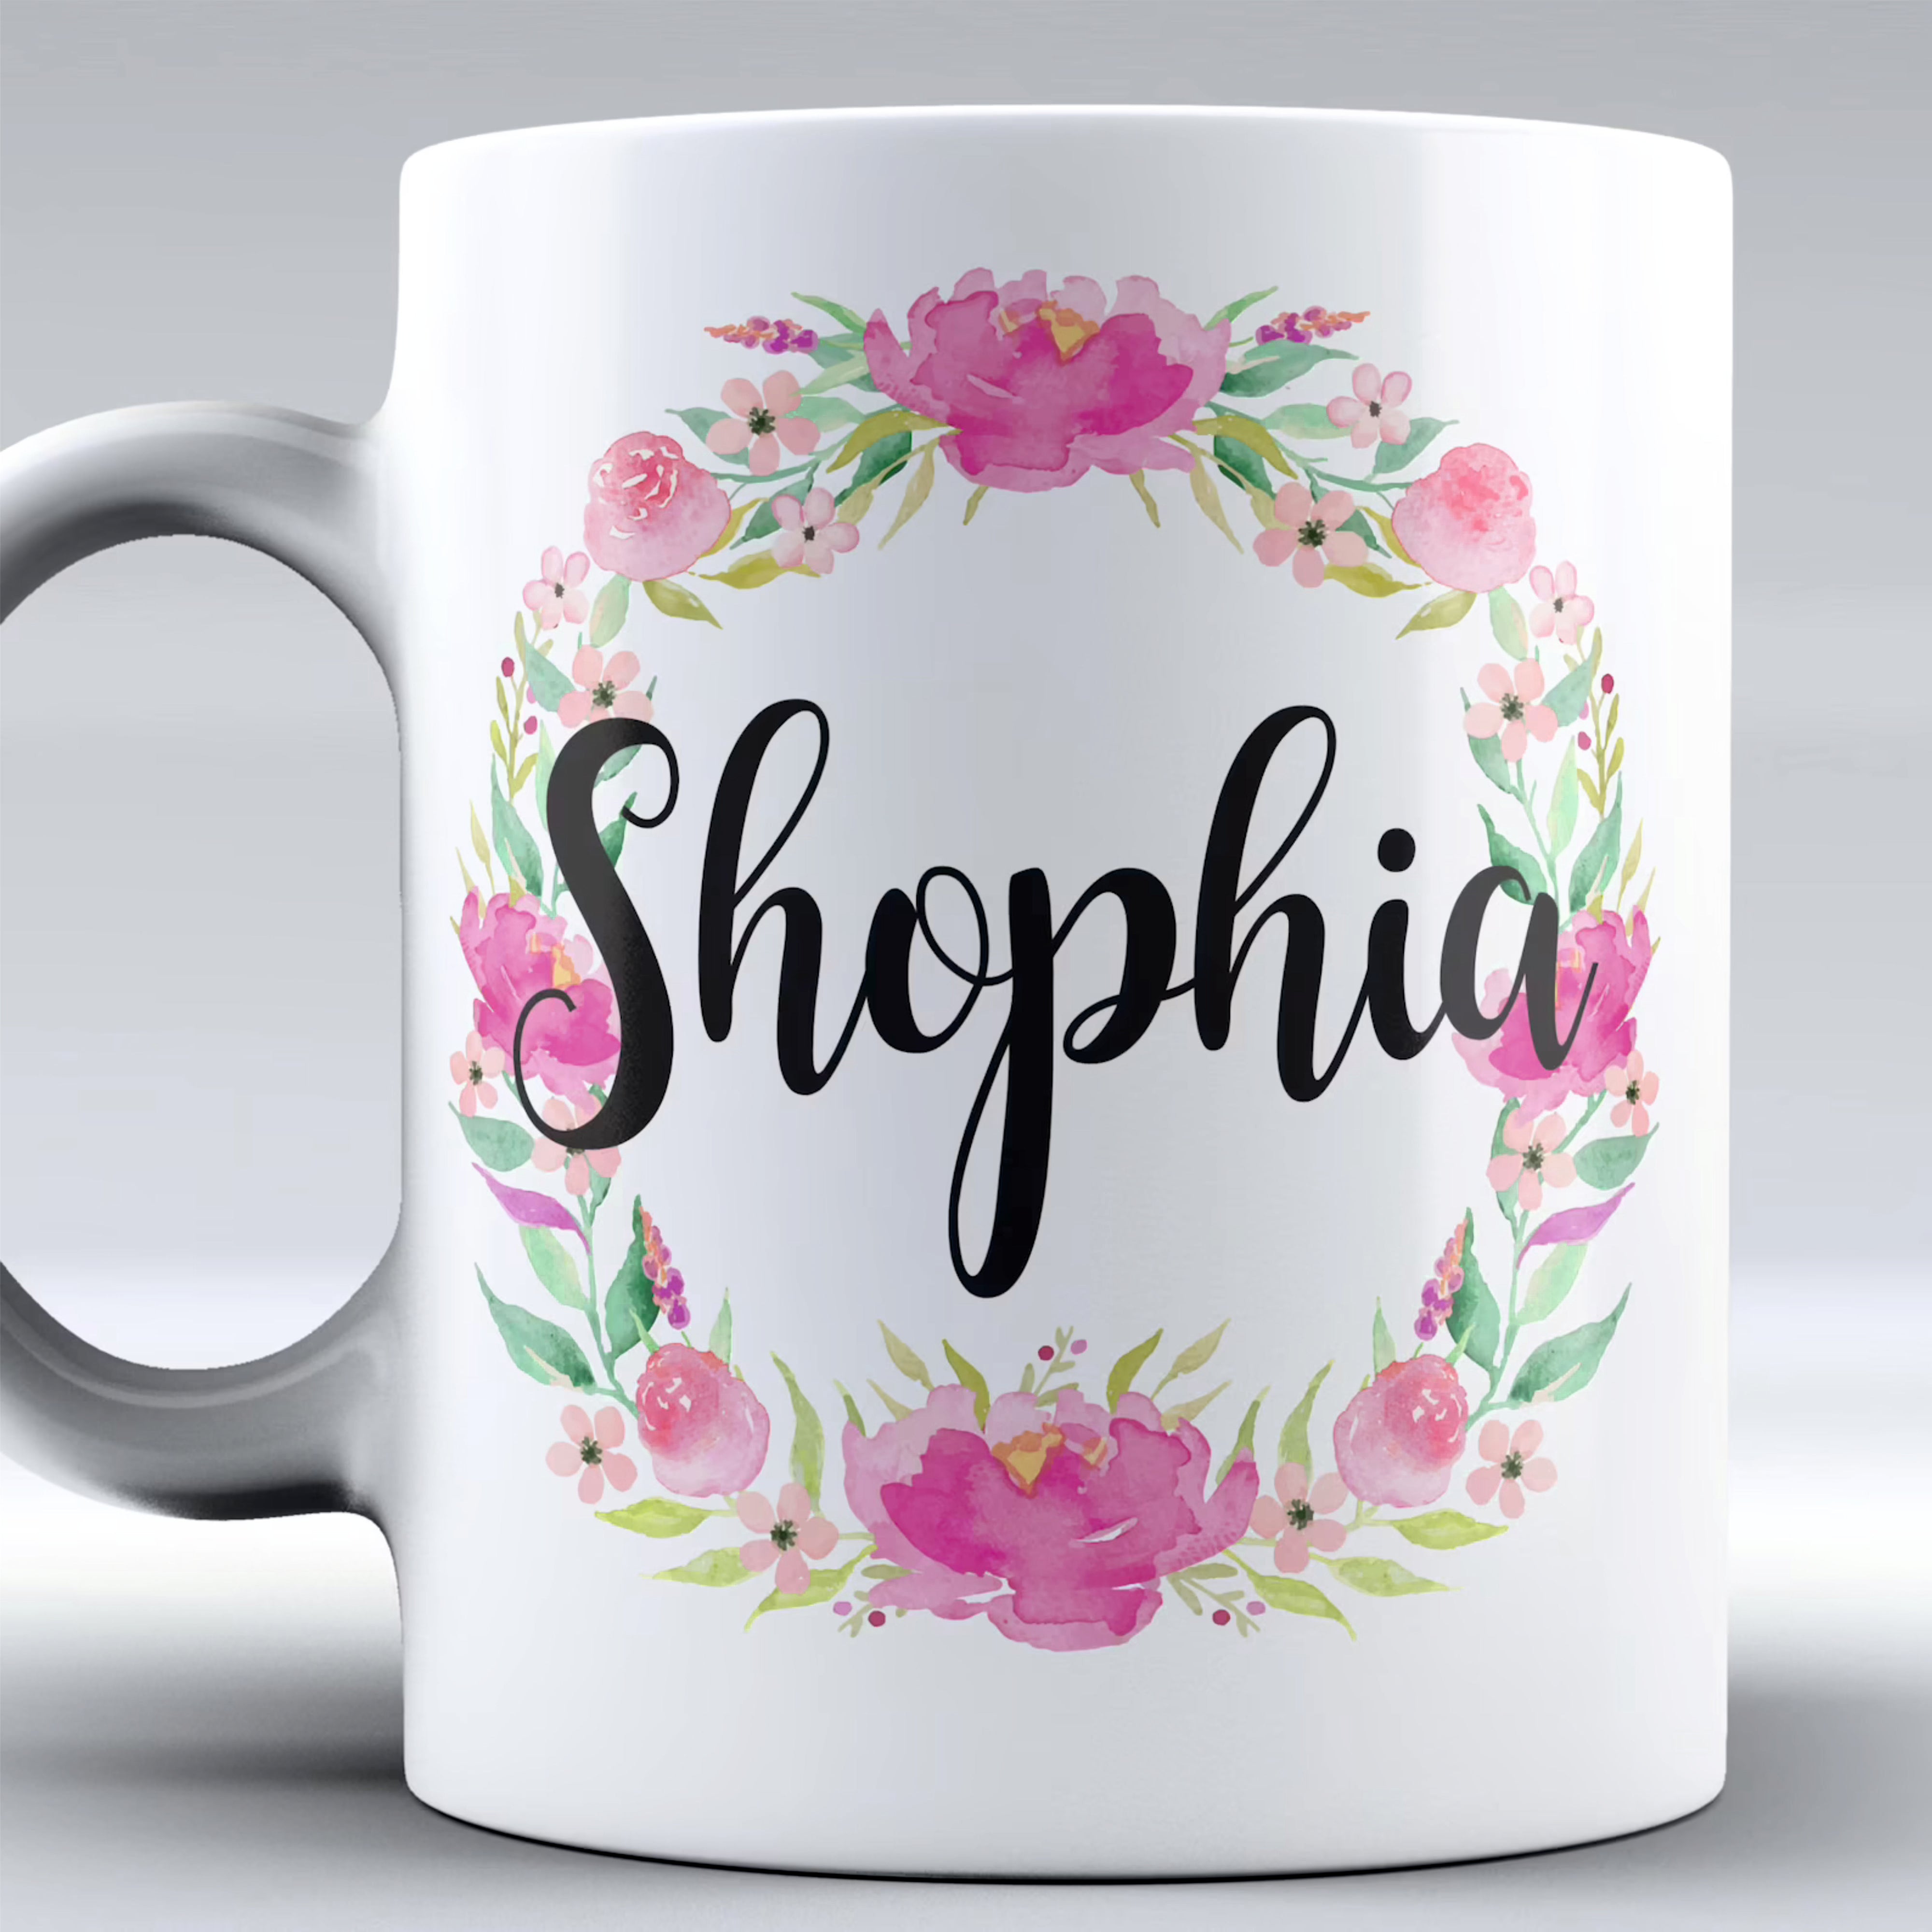 Name with flowers - Personalized Mug (Set of 5 Piece)